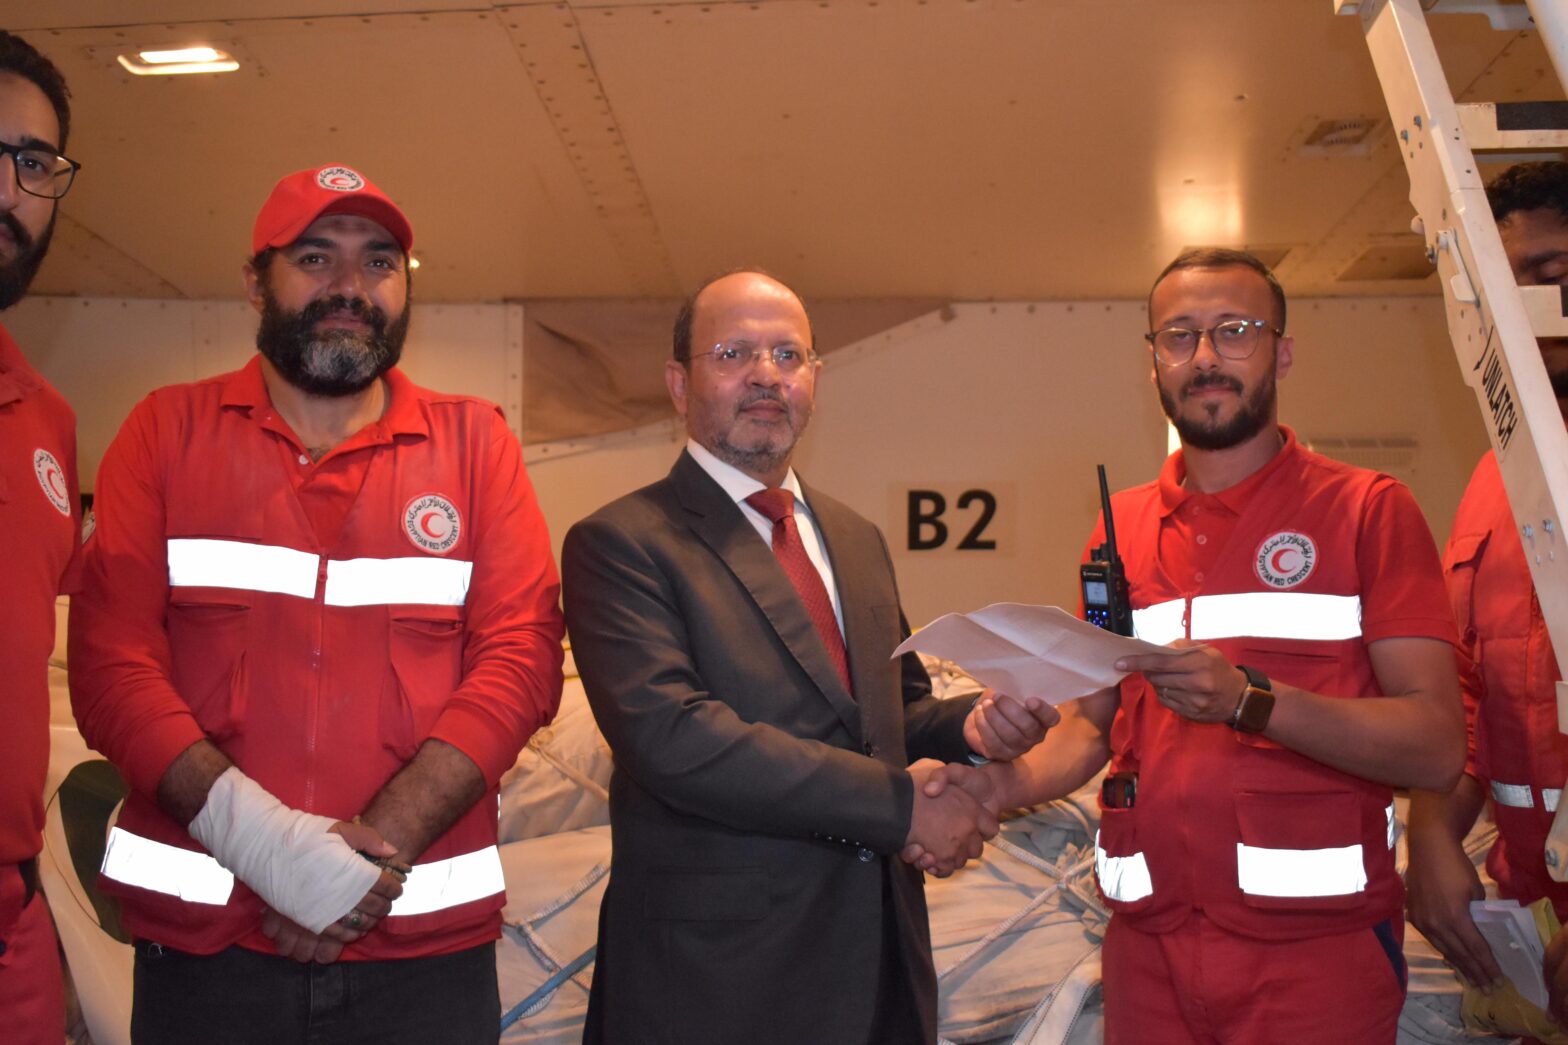 Pakistan's humanitarian aid to Gaza lands in Egypt